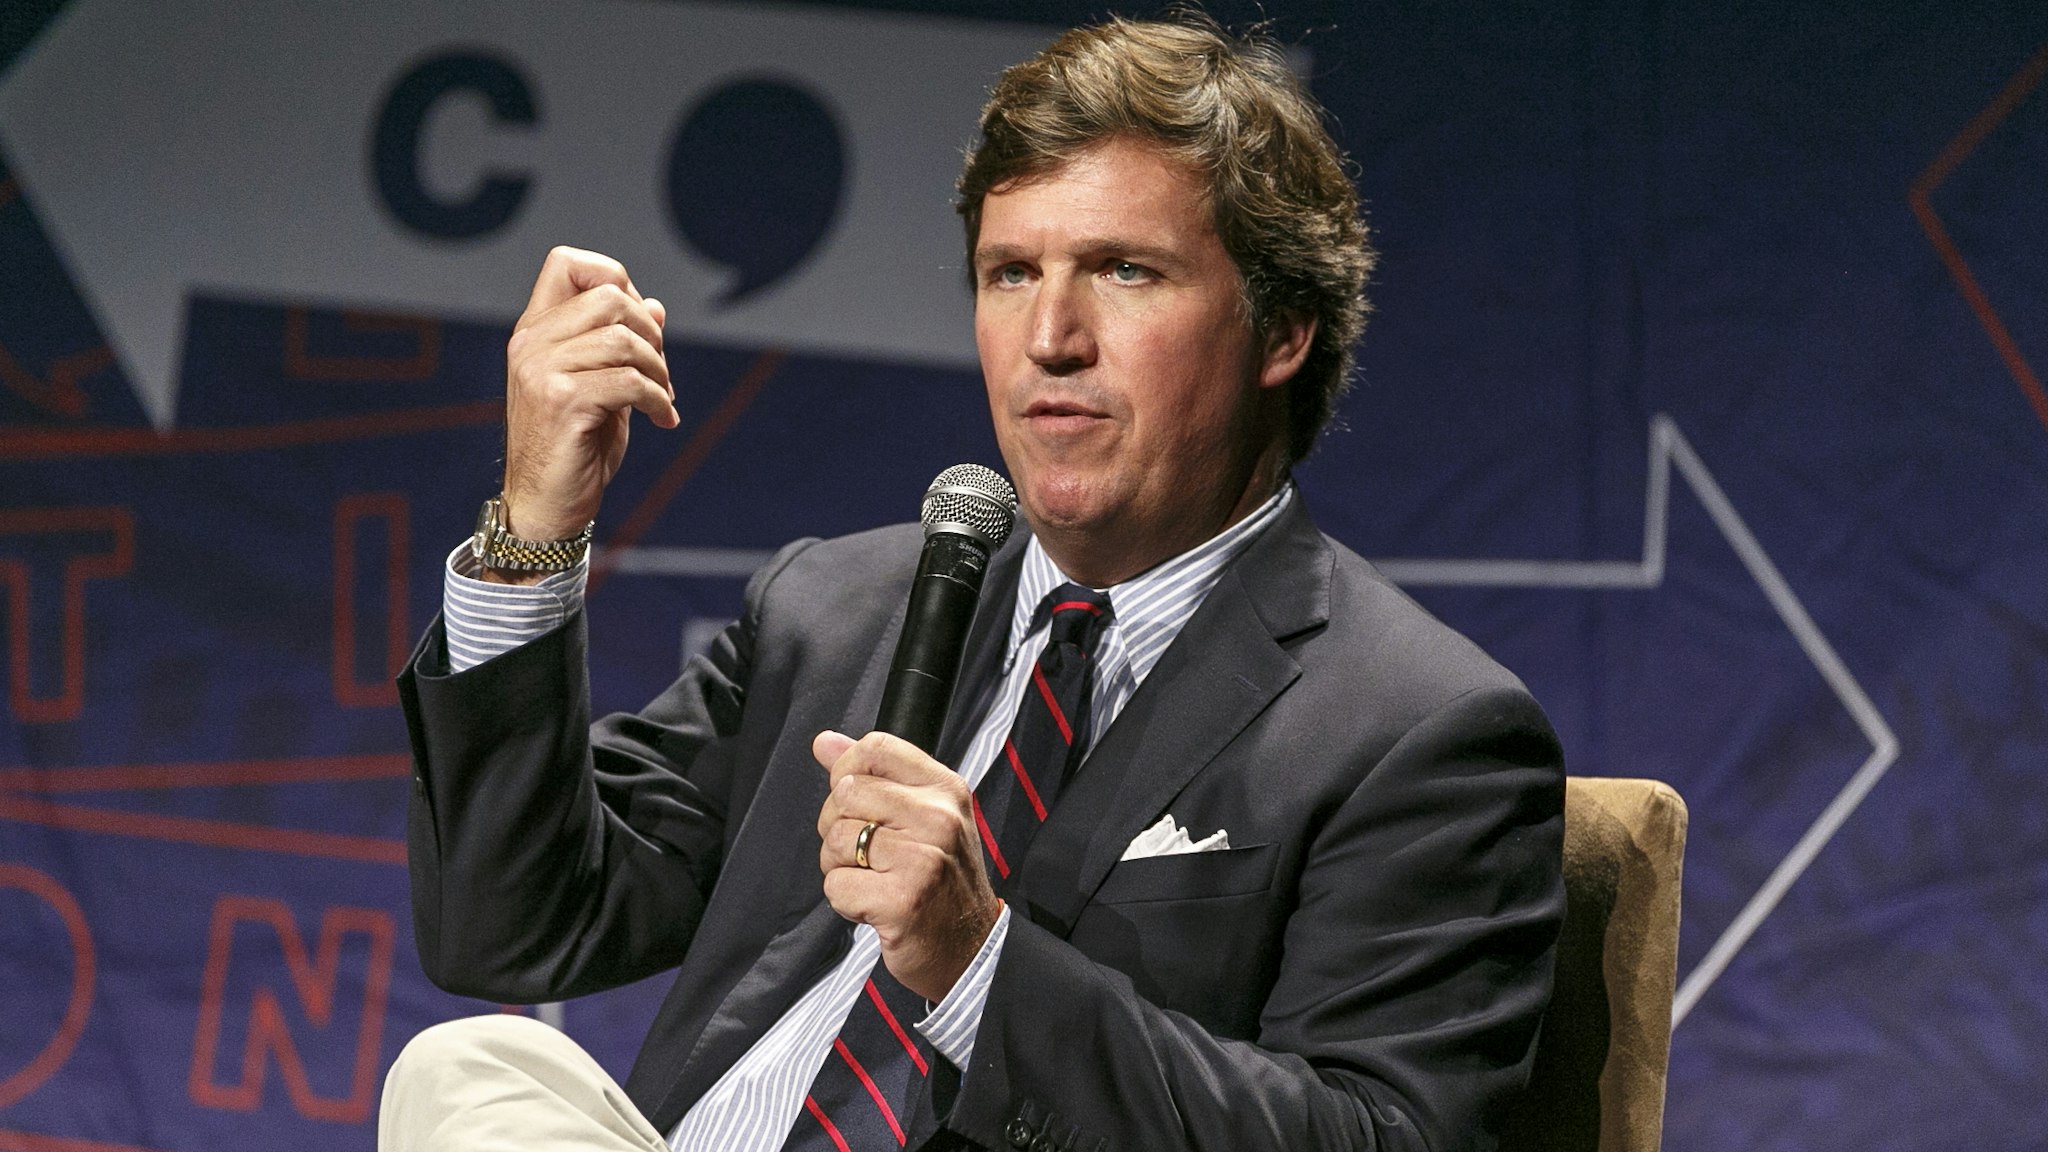 LOS ANGELES, CA - OCTOBER 21: Tucker Carlson speaks onstage during Politicon 2018 at Los Angeles Convention Center on October 21, 2018 in Los Angeles, California.